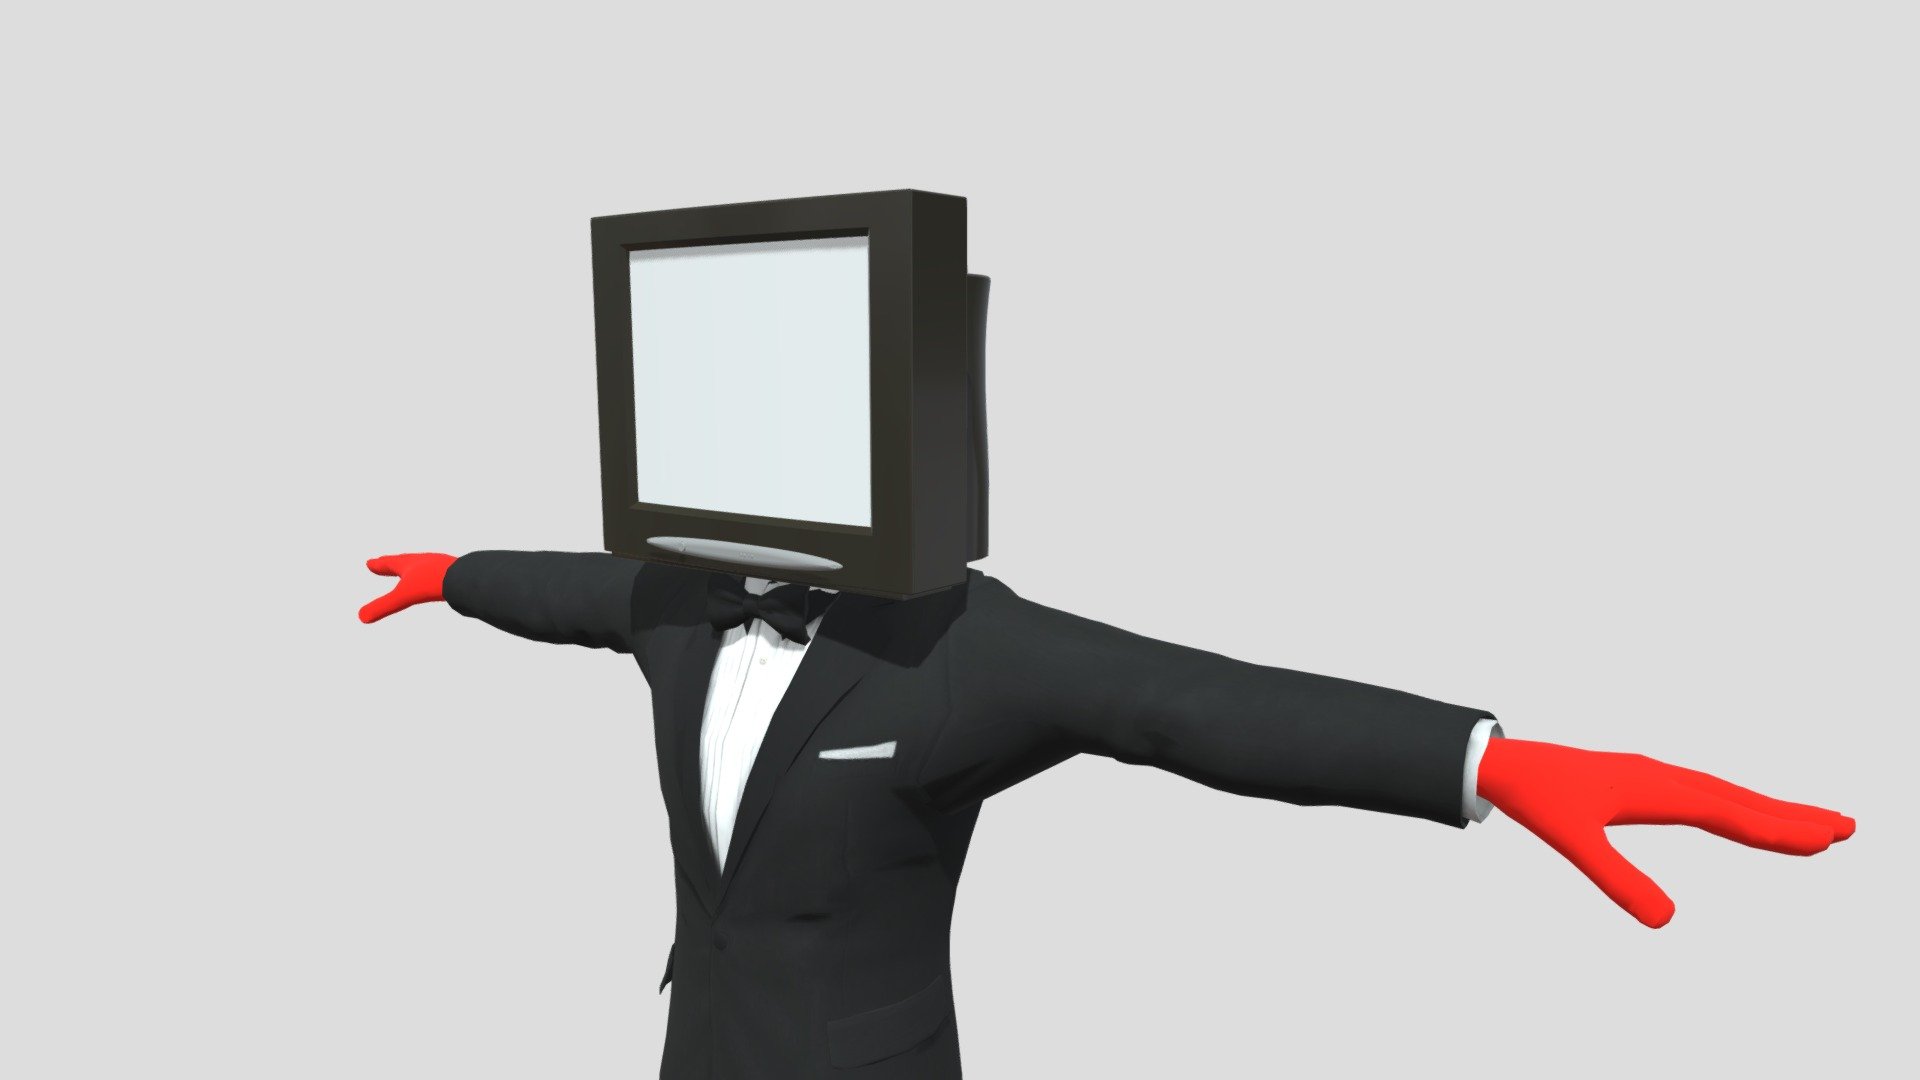 You can see what TV Man looks like with animation on my YouTube channel. https://www.youtube.com/@GipsoCartoon

!!! If you use my models in your videos, write a link to my account in the description 3d model